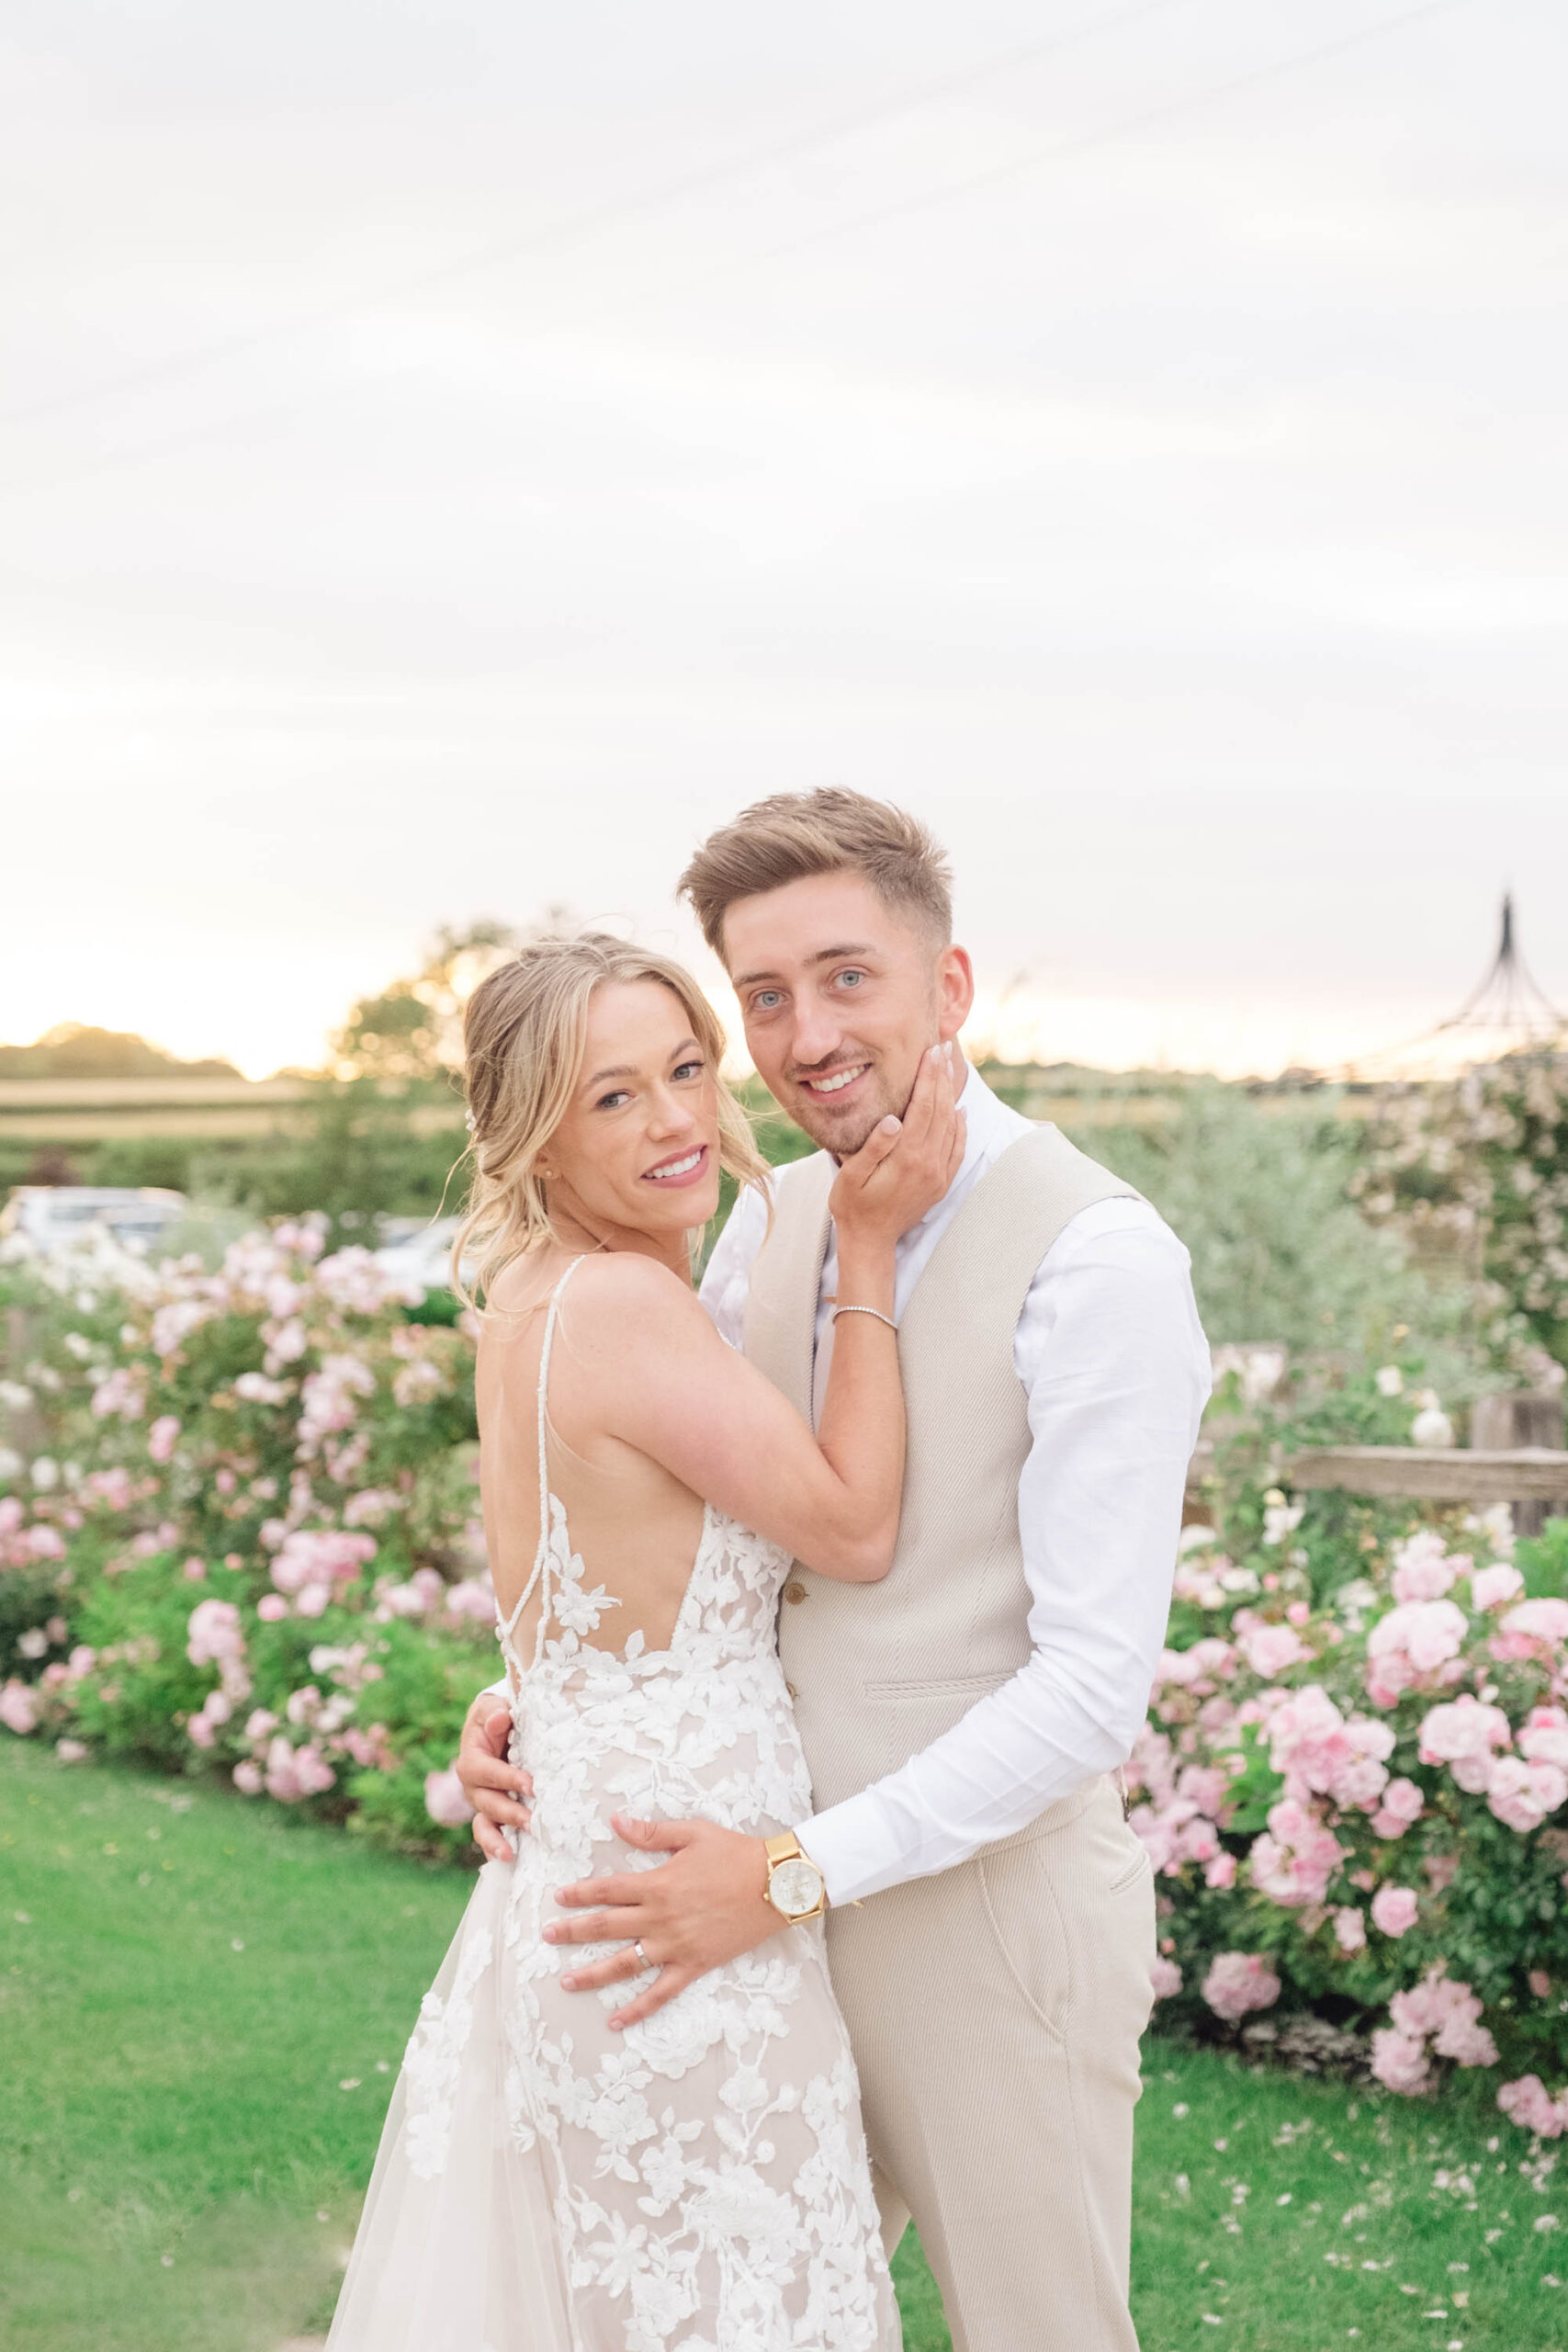 Romantic, light and airy posed wedding photo of a groom and bride with a pink rose border behind them. Taken by Staffordshire wedding photographer Jordan Fox Photography